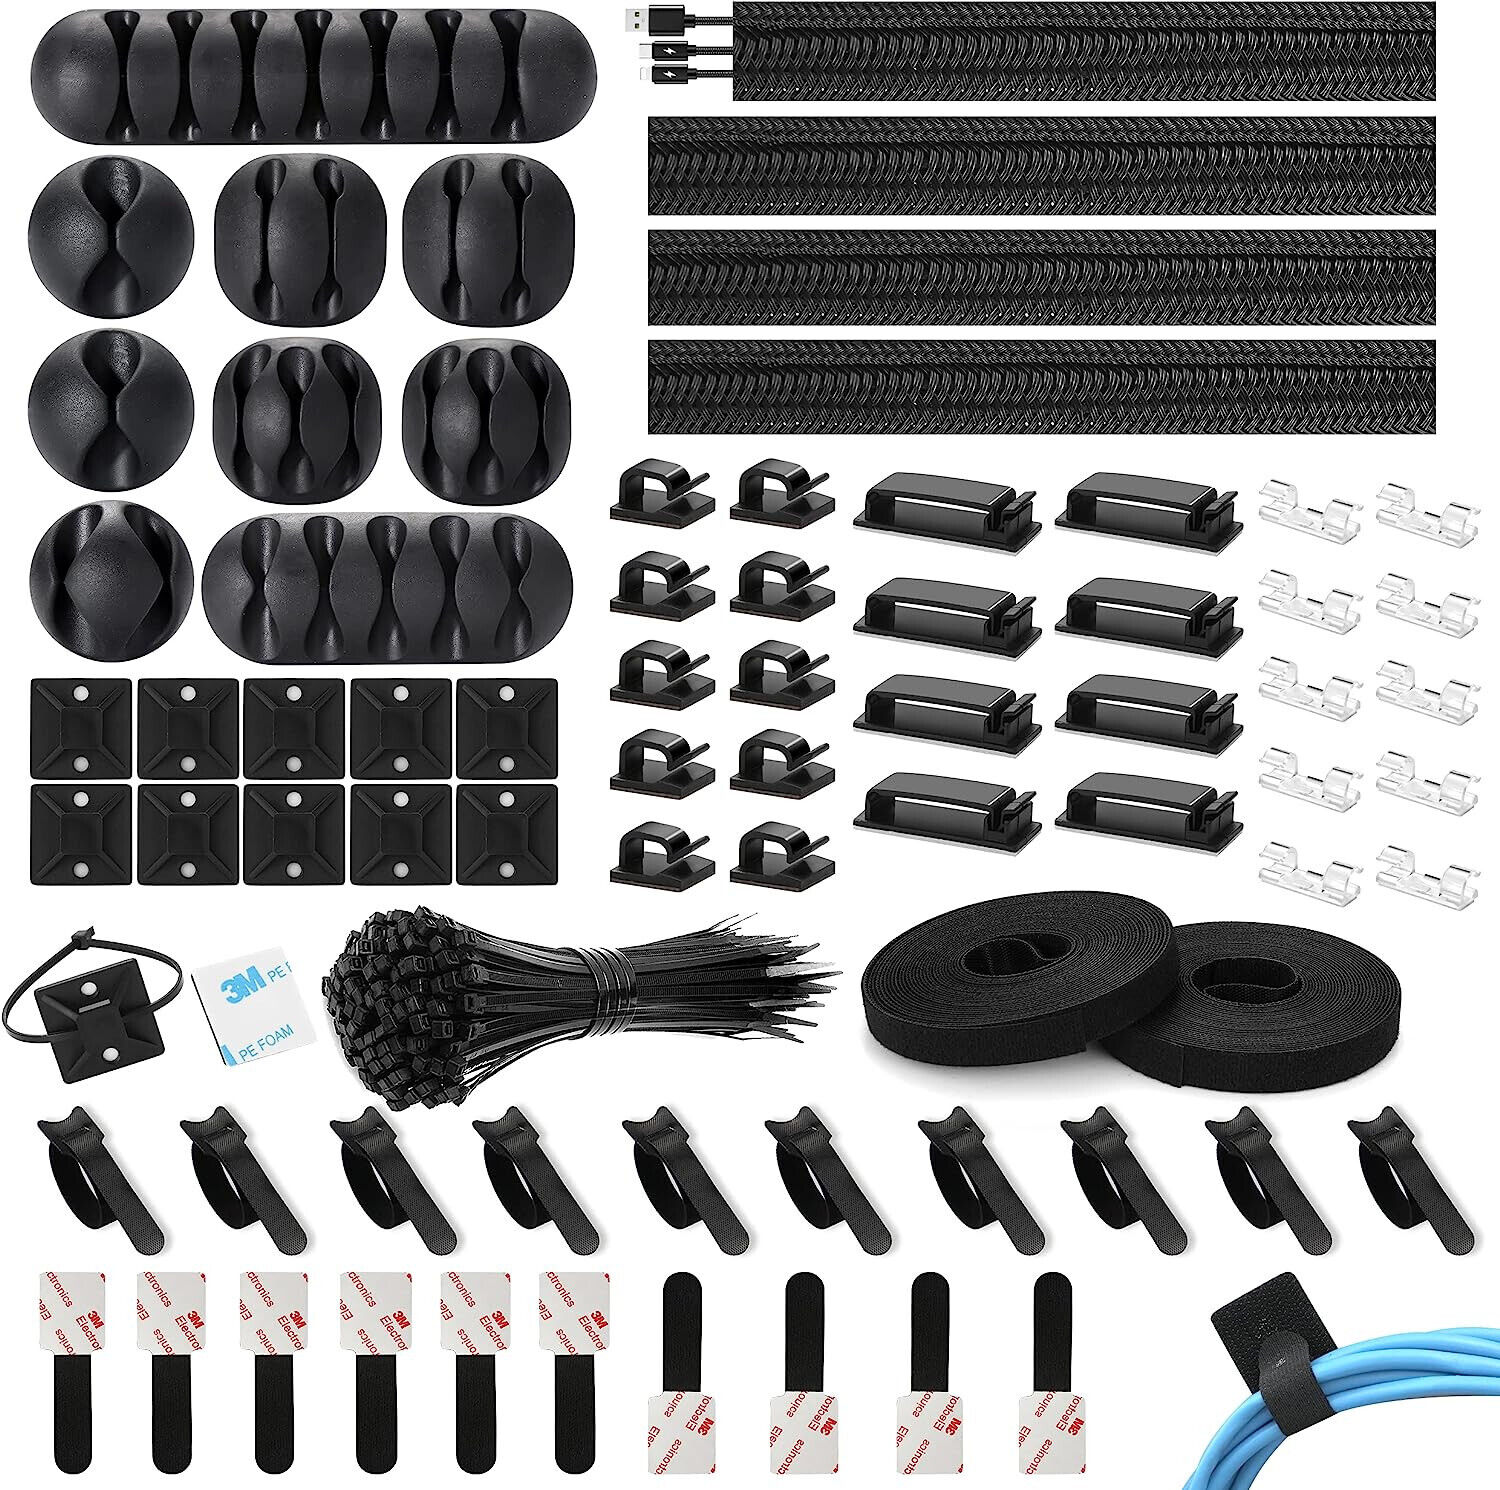 173 Pcs Cable Management Kit Wire/Cord Organizer Zip Ties Holder Clips Adhesive